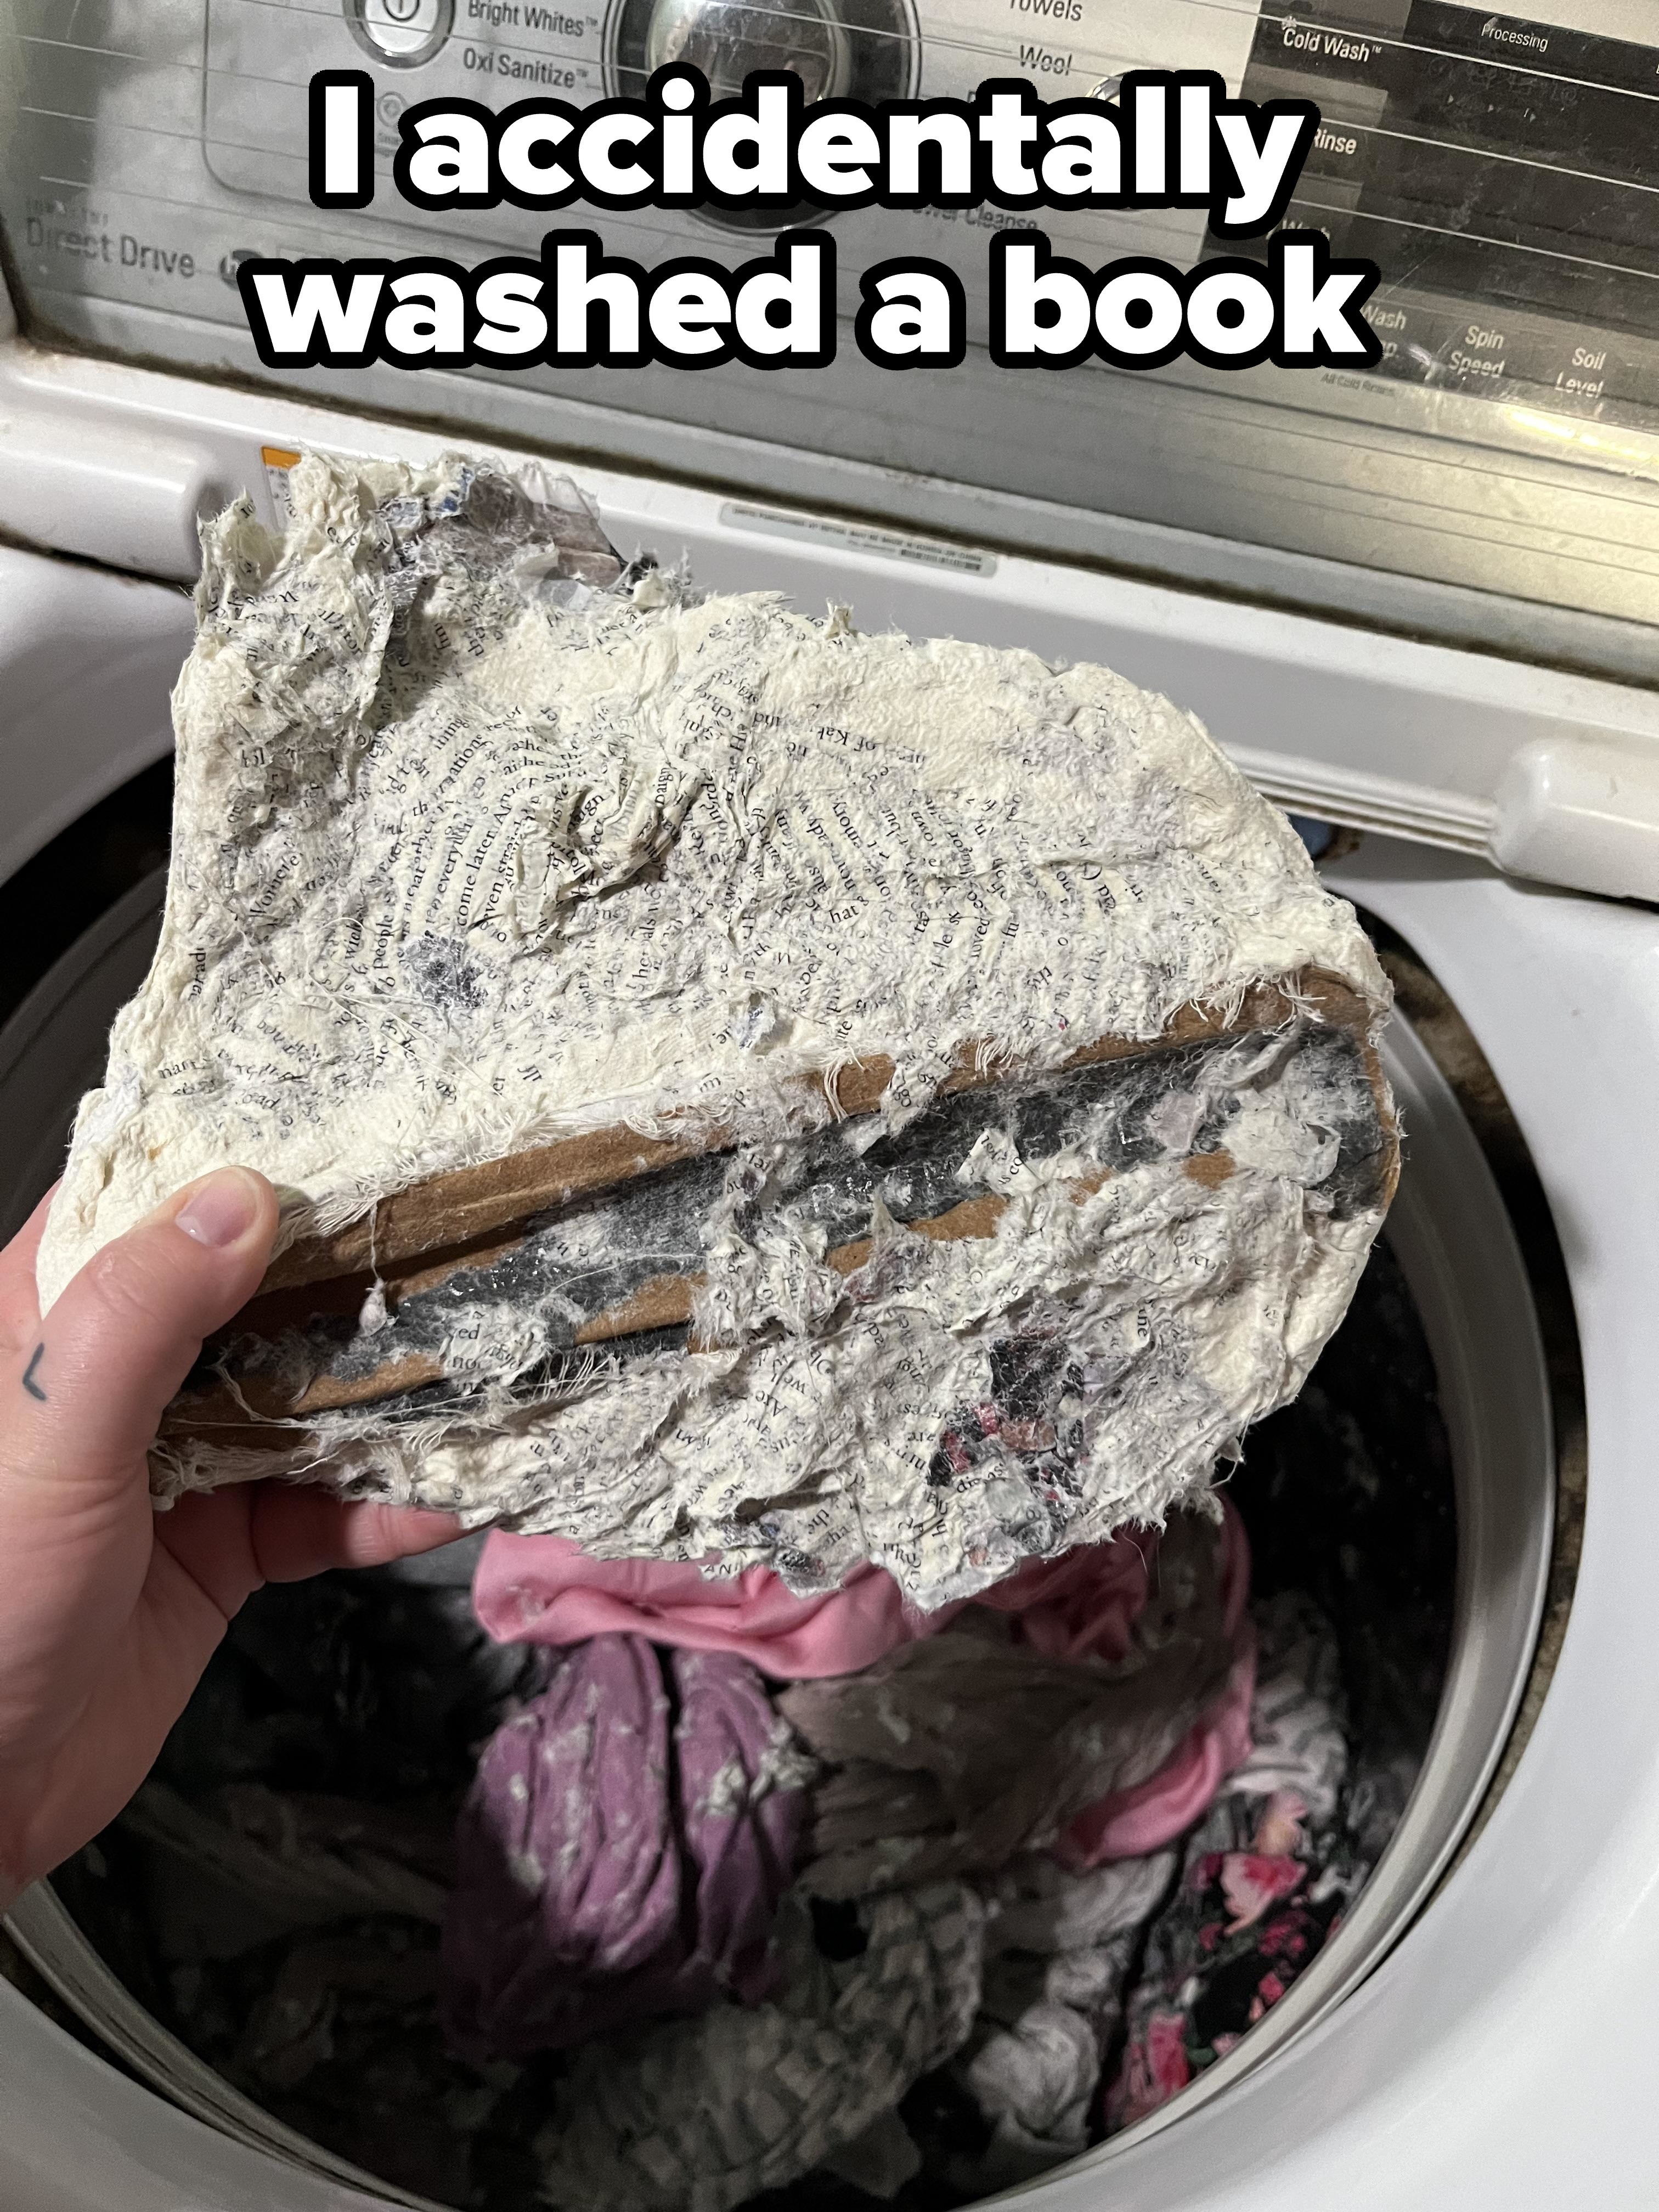 &quot;I accidentally washed a book&quot; with someone holding a dried-out pile of tattered paper